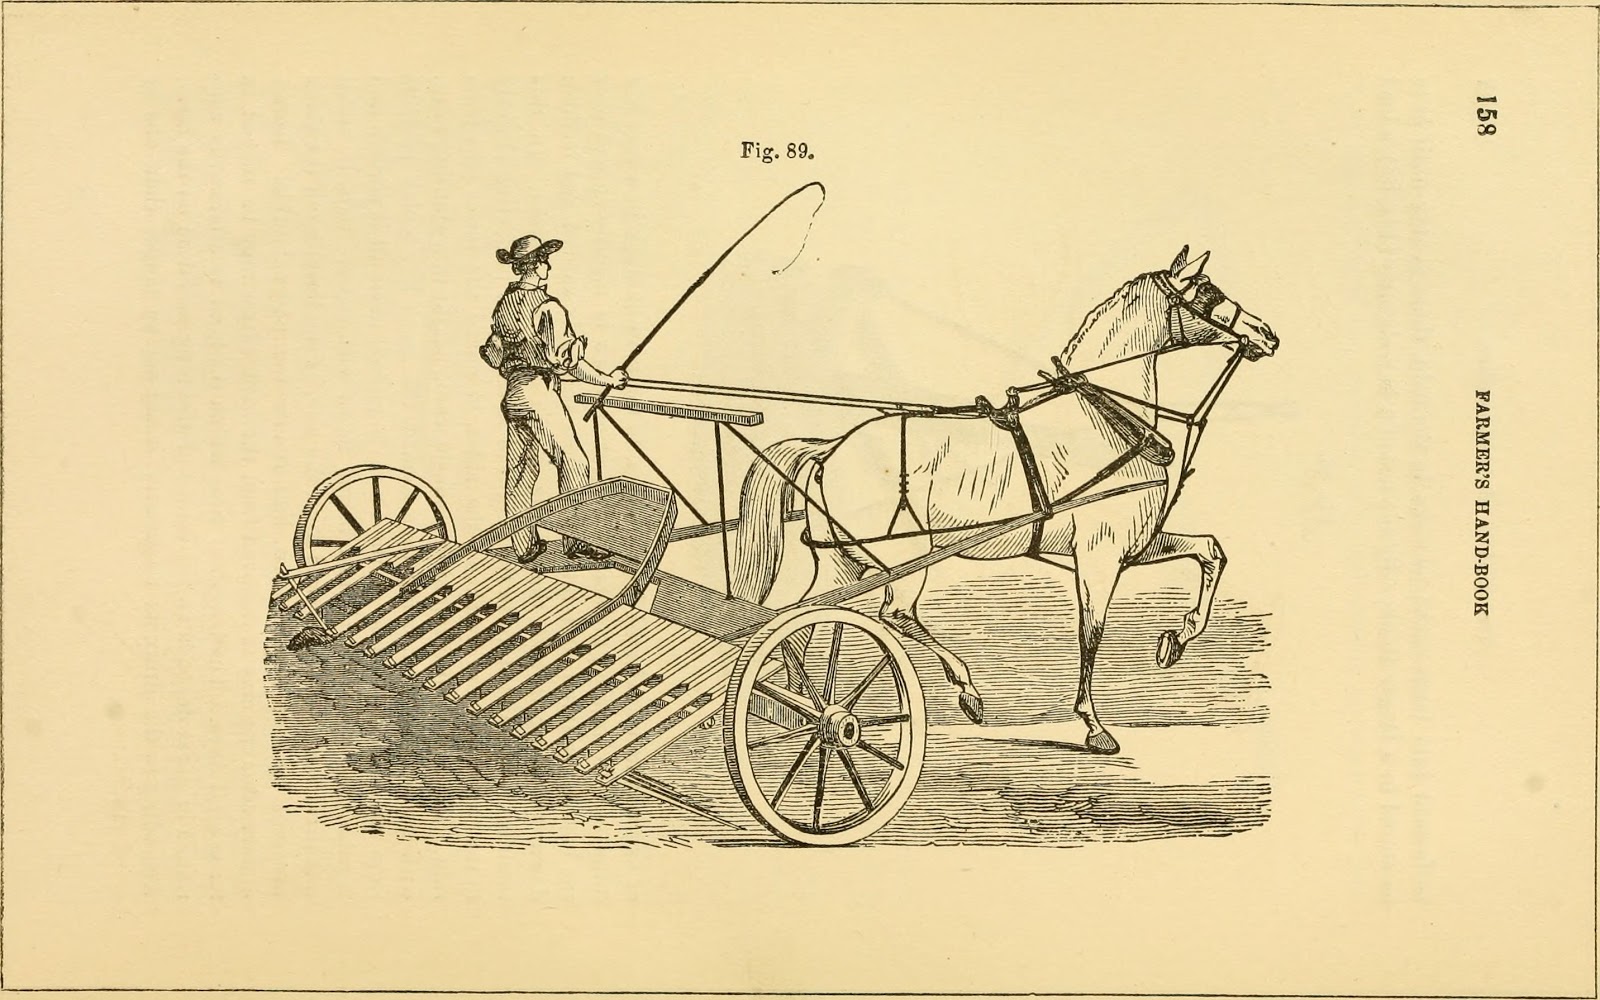 image of horse drawn plow from farmers handbook